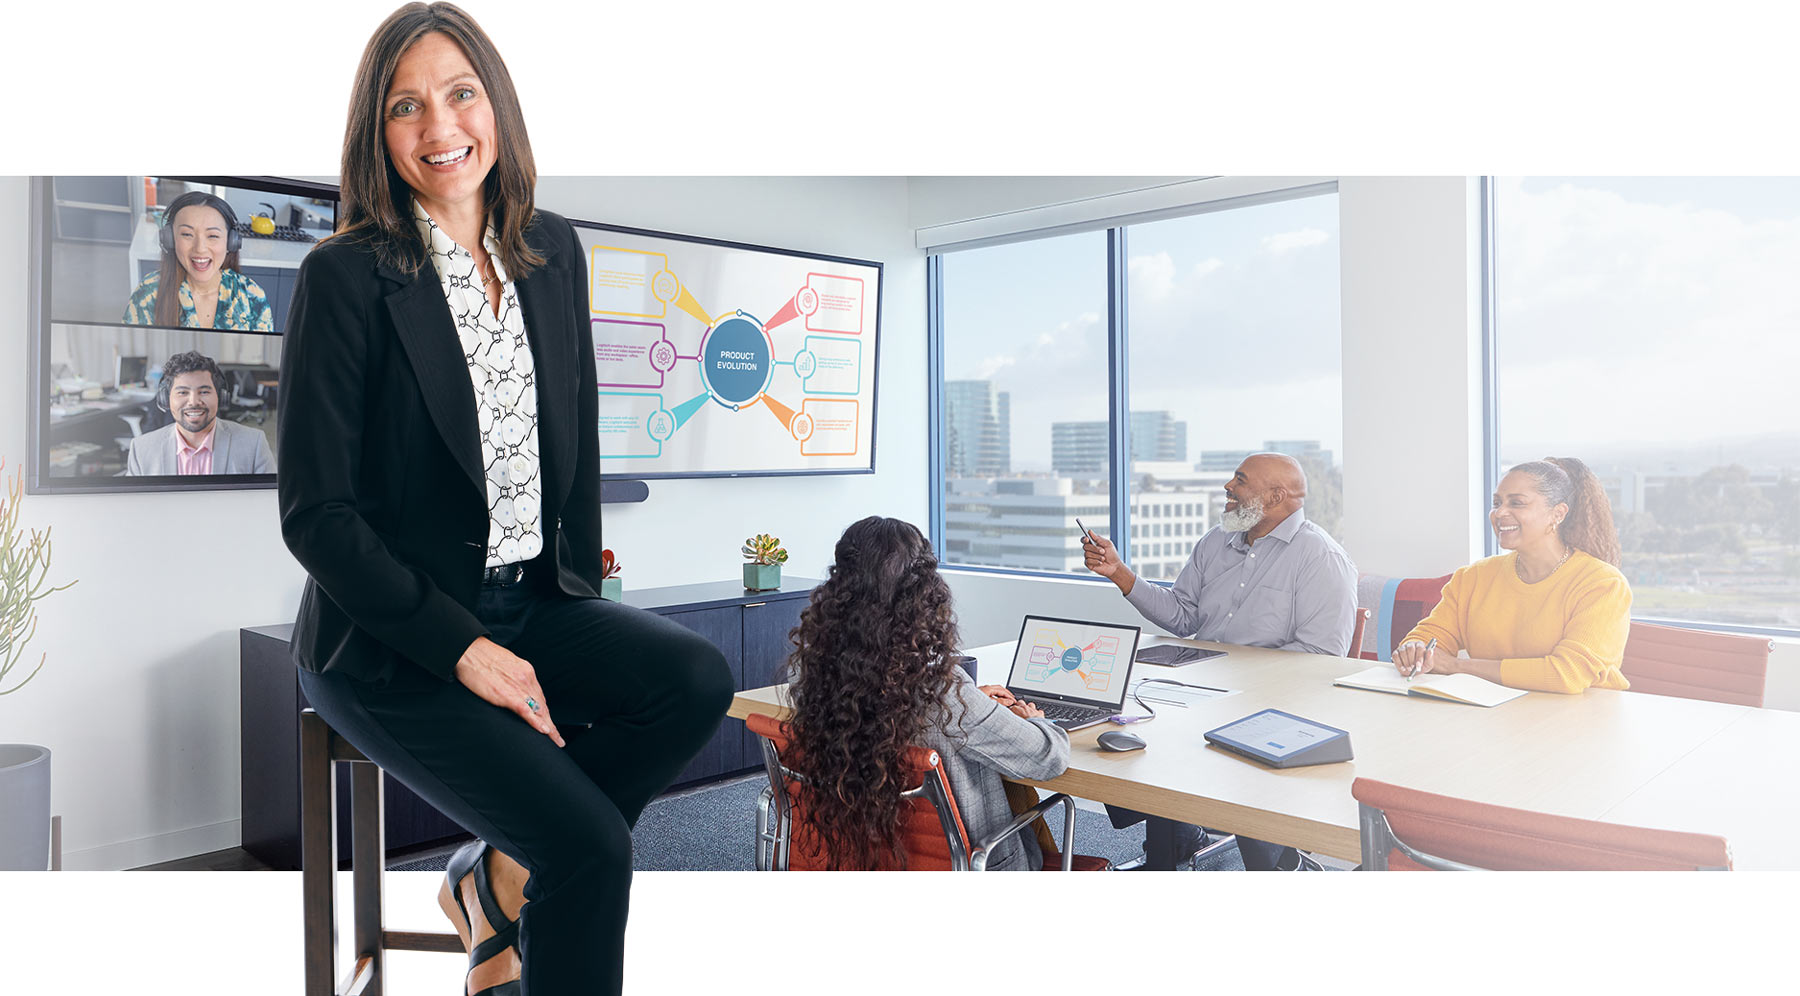 woman sitting on chair with background image of office meeting